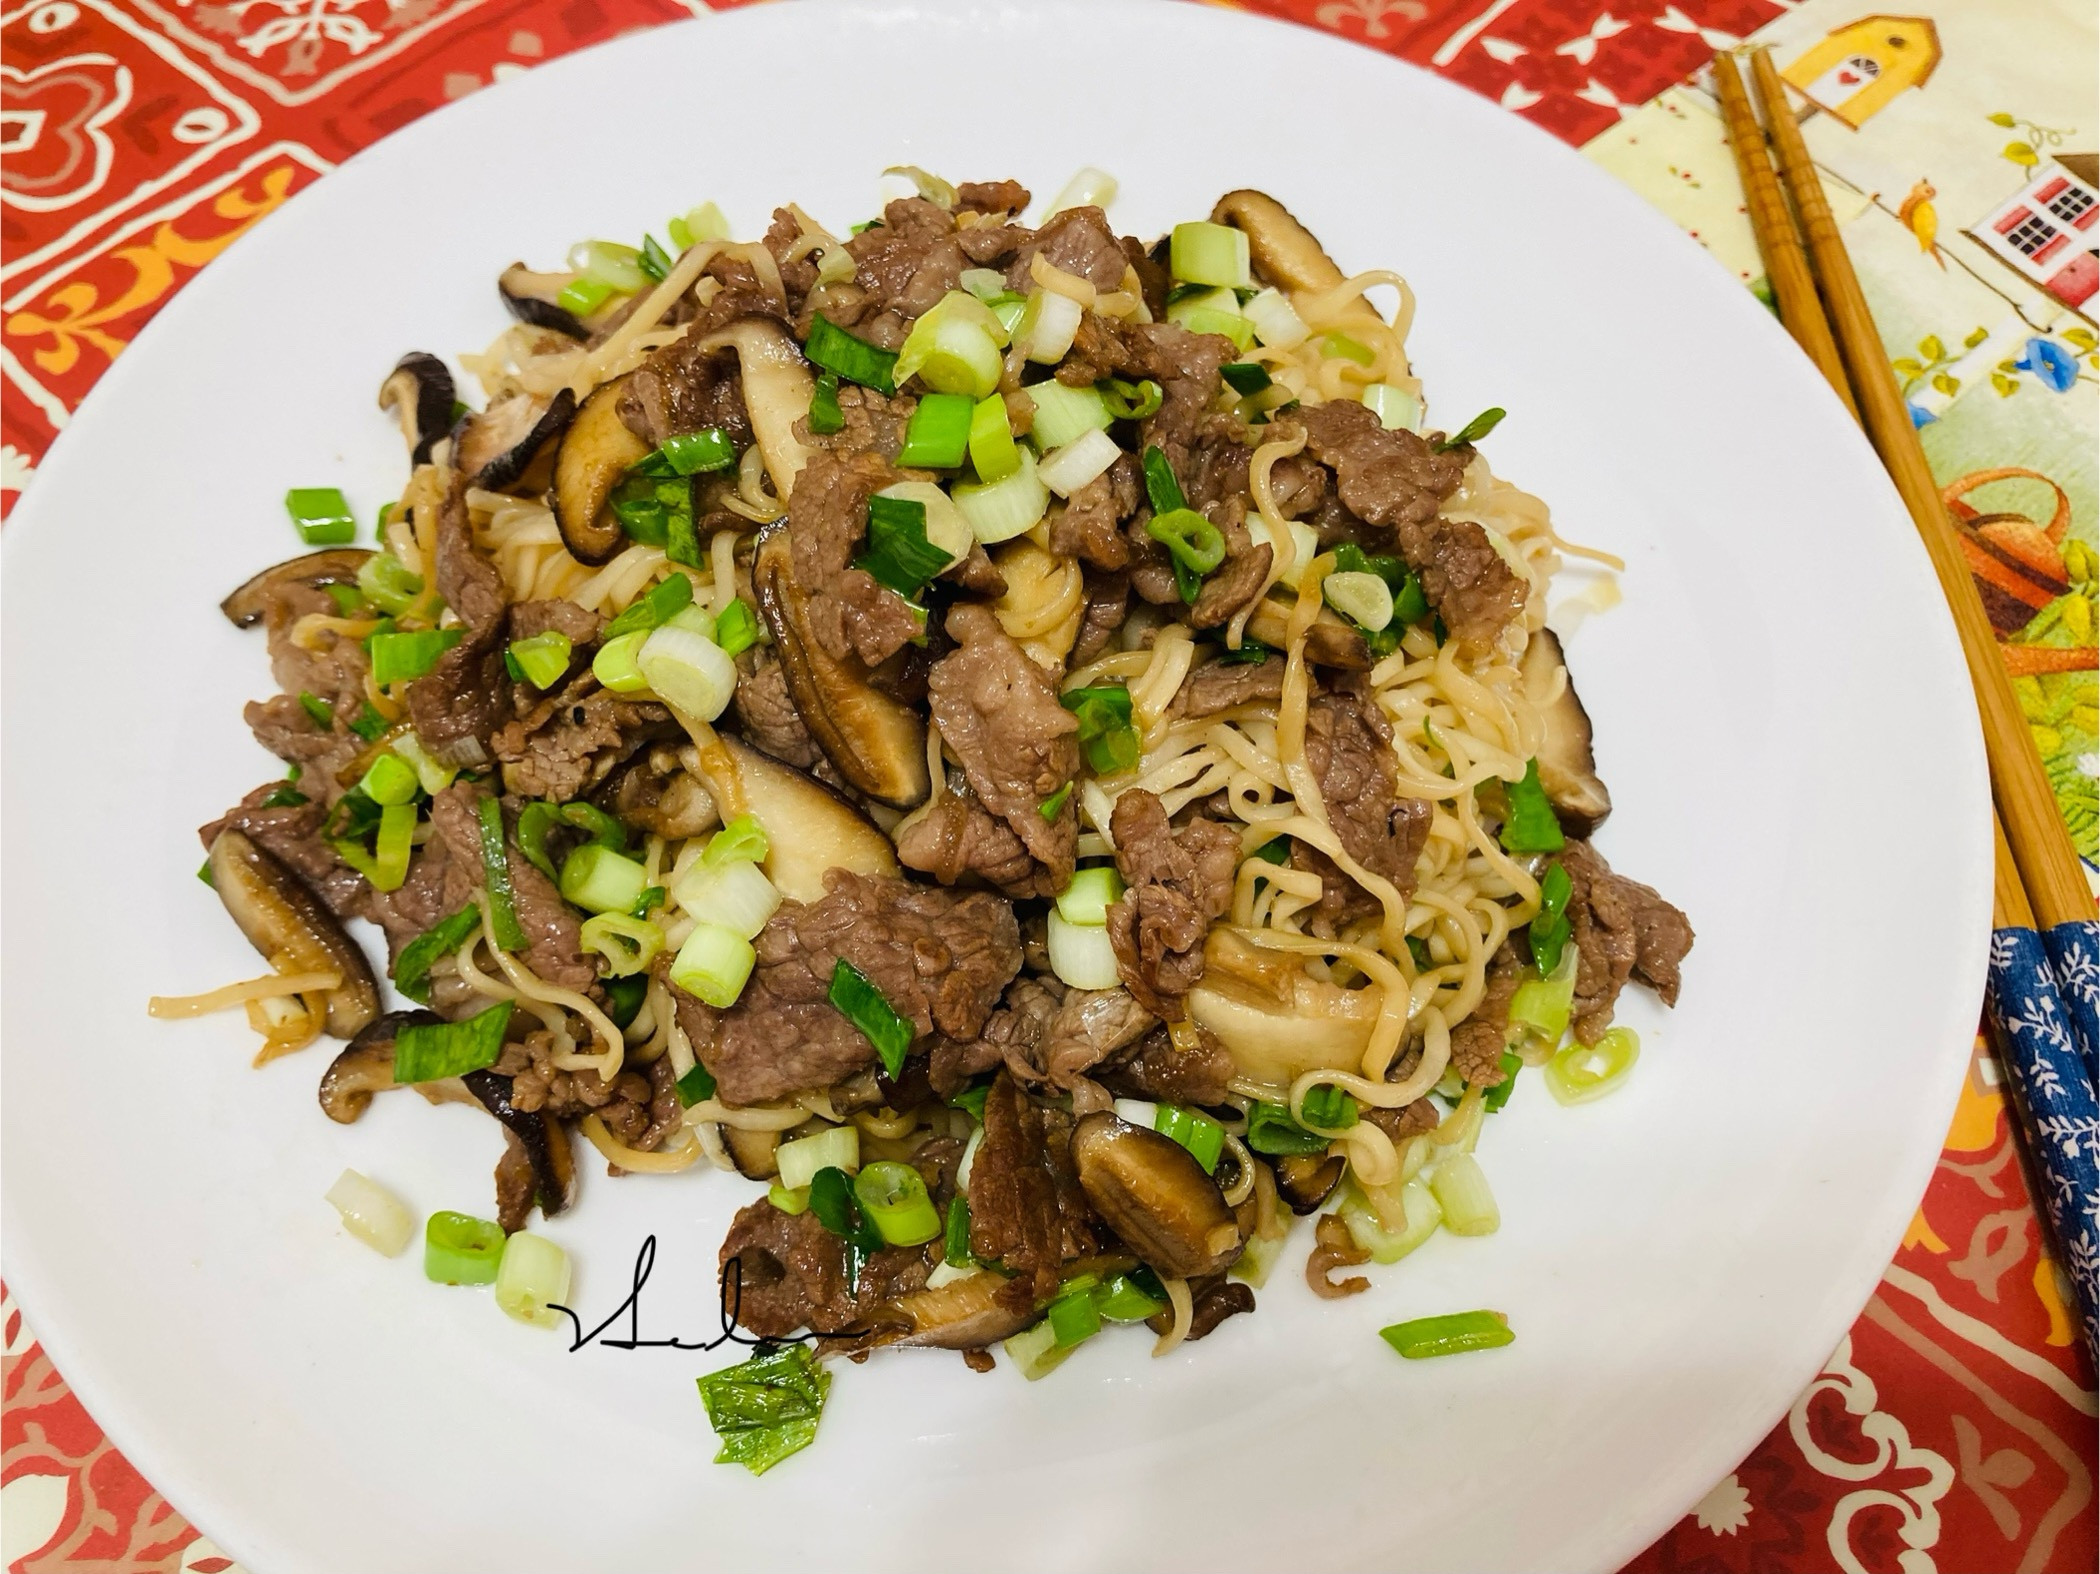 Stir-fried instant noodles with beef and mushrooms / 10 minutes - 愛料理